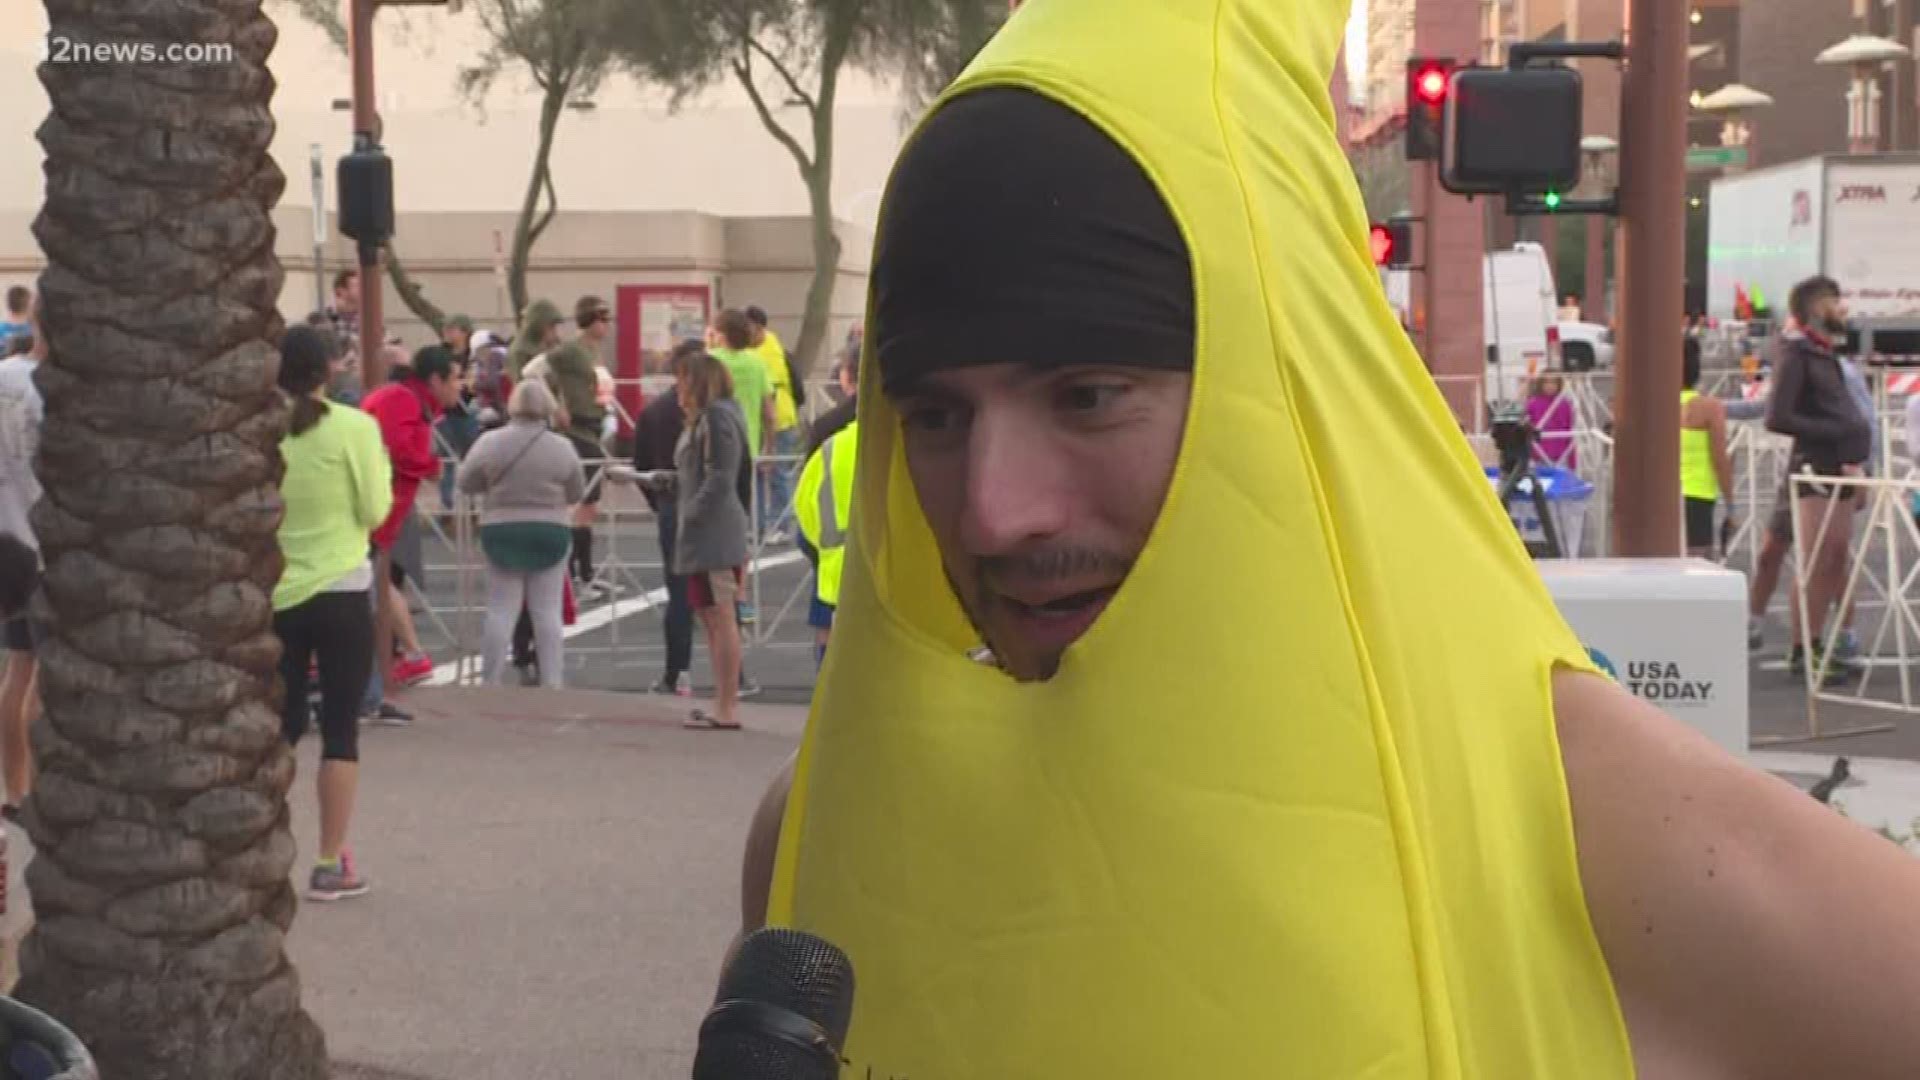 This was Jordan Maddocks' 14th year in a row running in the Rock 'N' Roll Marathon but the first year doing so as a banana.